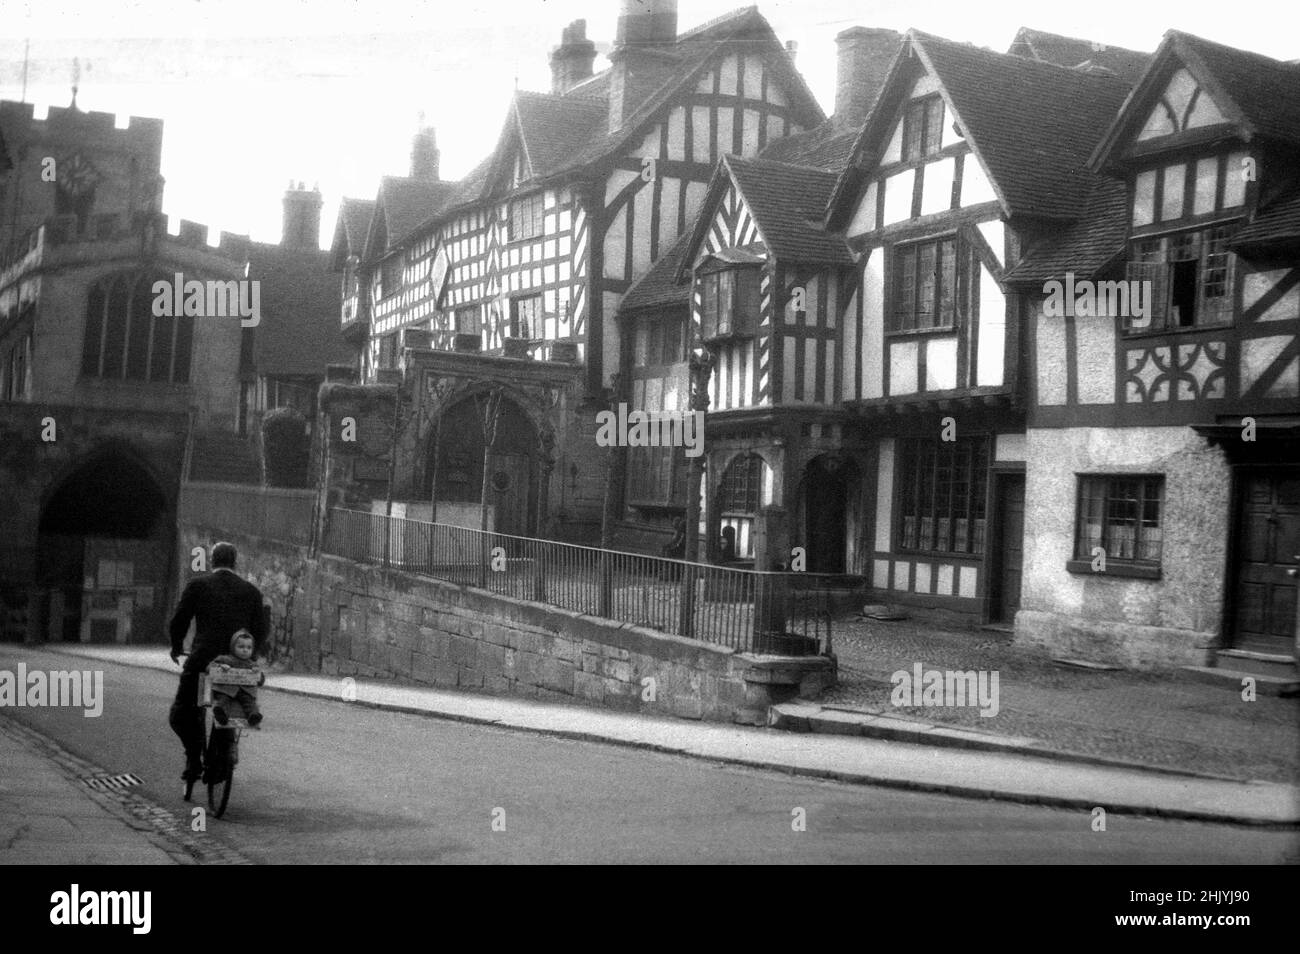 1940s, historical view from this time of Lord Leycester's hospital, Warwick, England, UK. Situated next to West Gate on the High Street, Robert Dudley, Earl of Leicester acquired the buildings in 1571, to be used as a hospital for aged or injured soliders under a royal charter from Queen Elizabeth 1. In that era, a hospital did not mean a medical facility, but more of a care or rest home. In the street, we can see a man on a bicycle, with a small child sitting on the back. Stock Photo